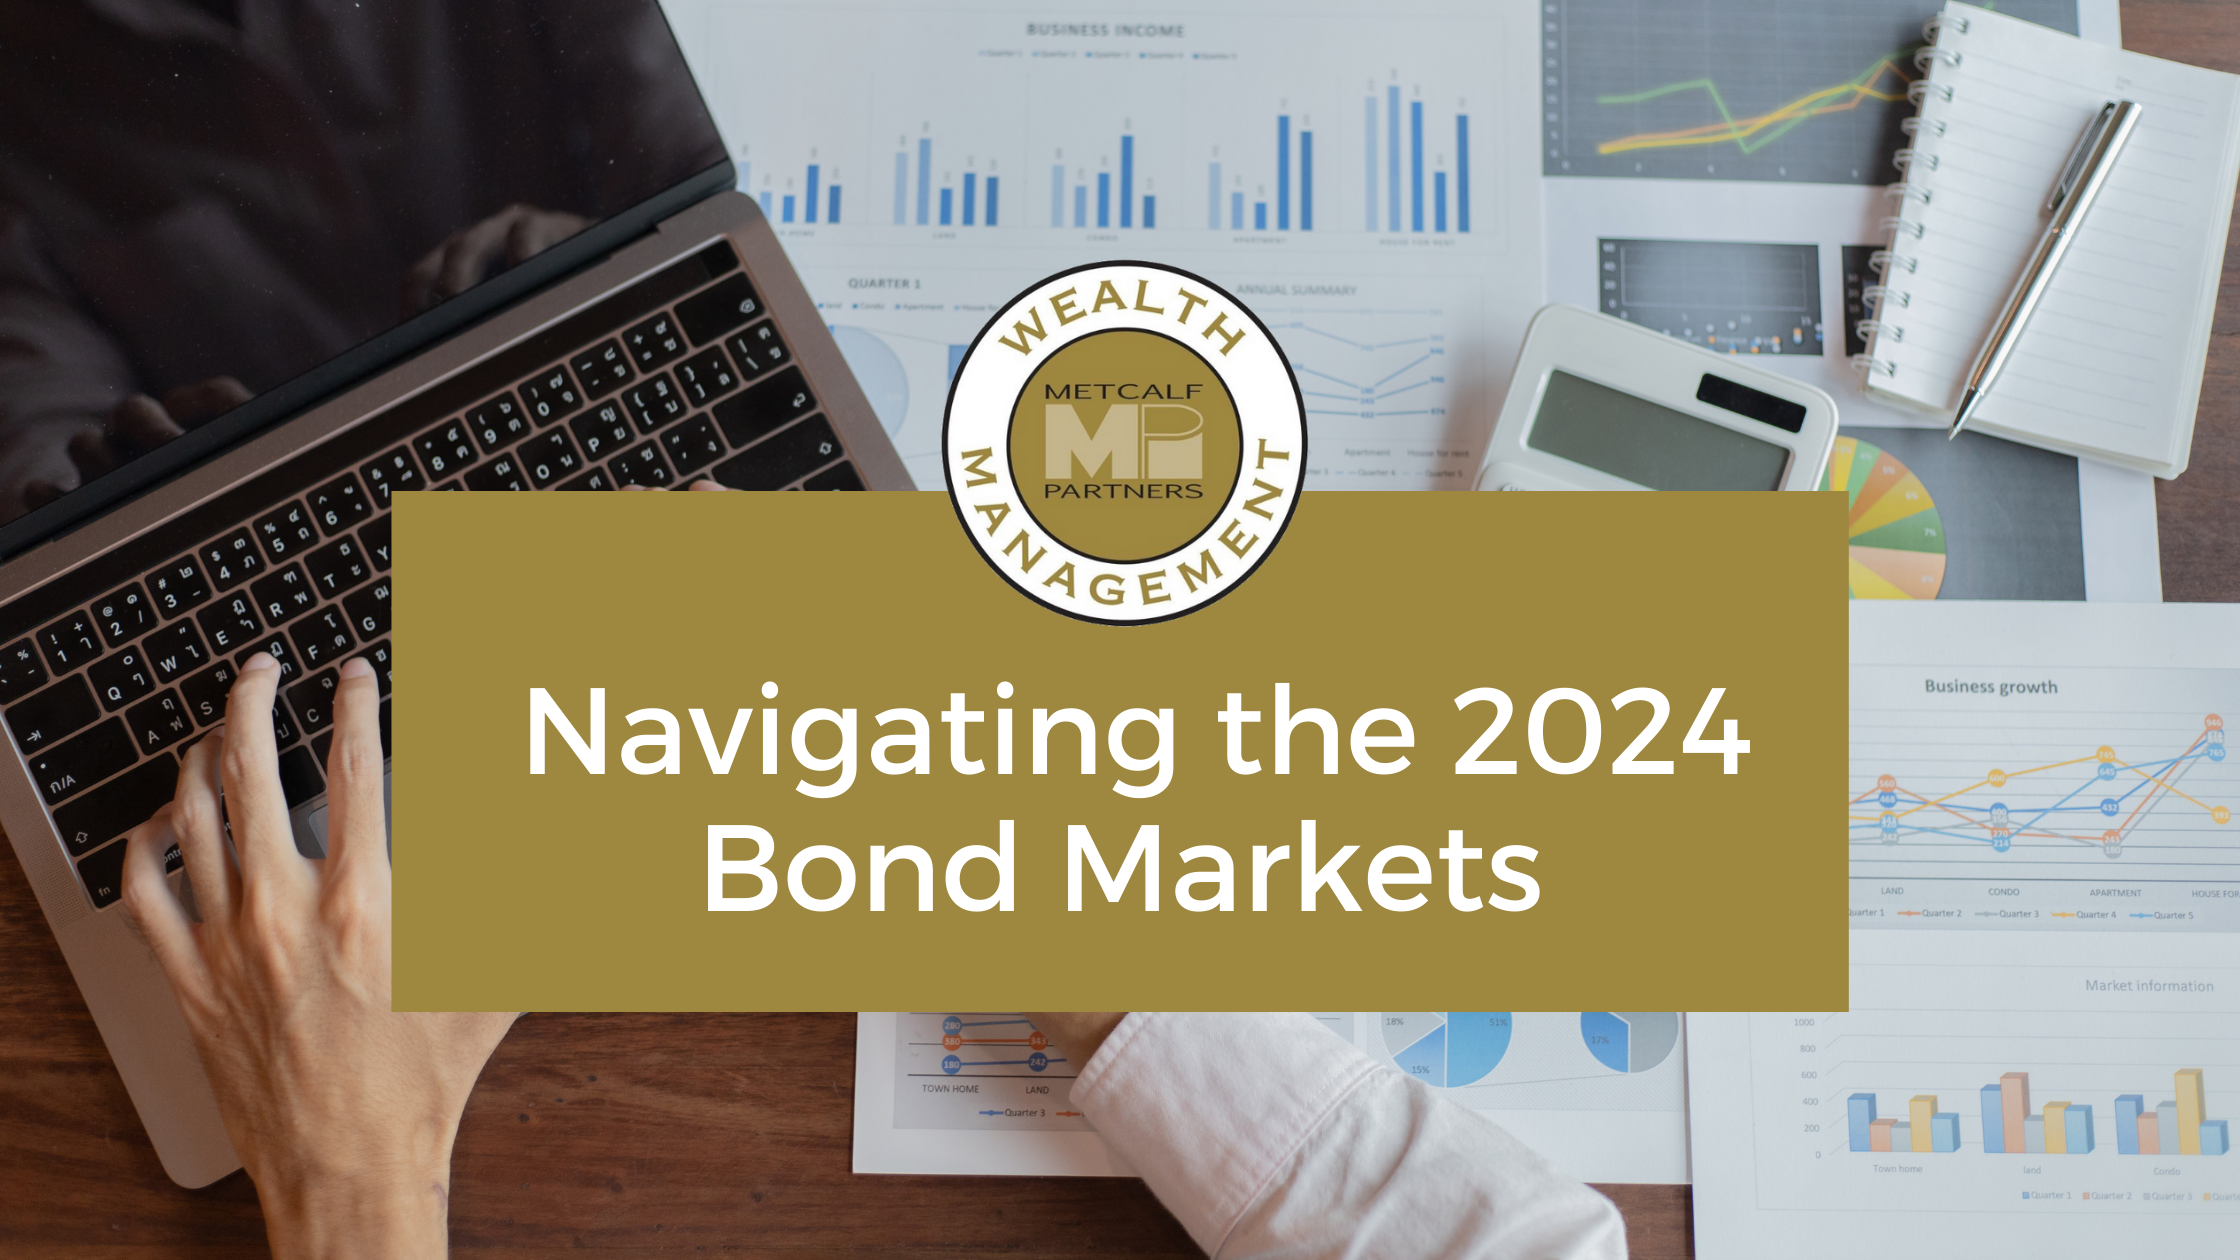 Featured image for “Navigating the 2024 Bond Markets”